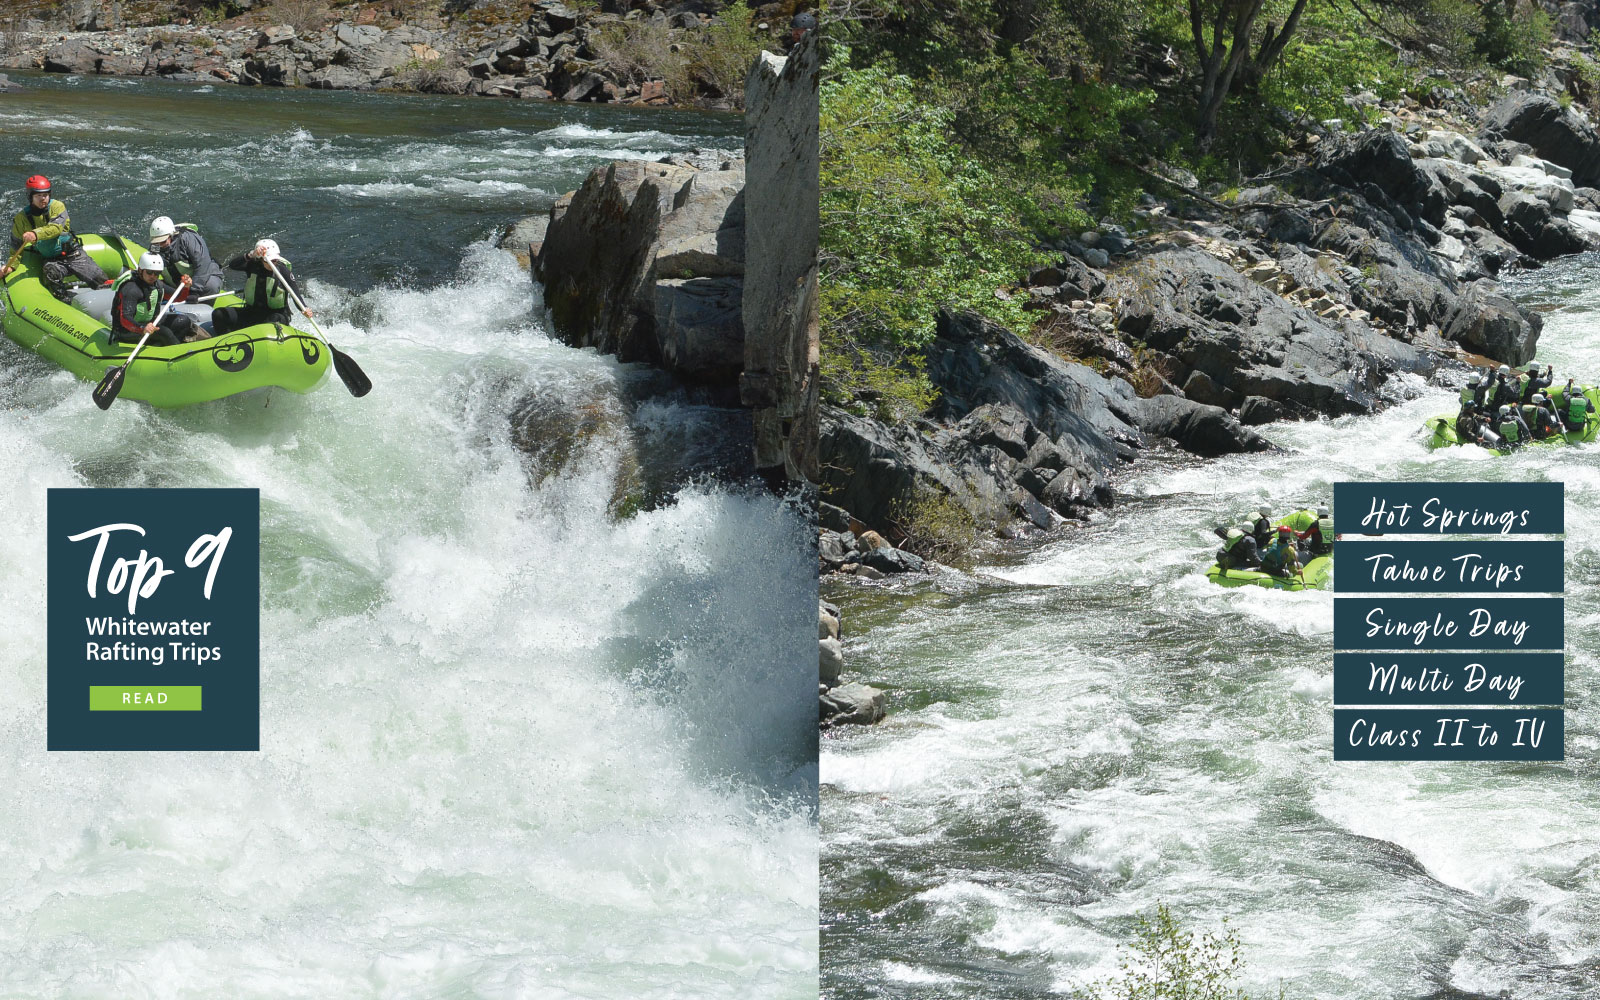 The top 9 whitewater trips on Tahoe snowmelt. Photo Credit: Tributary Whitewater